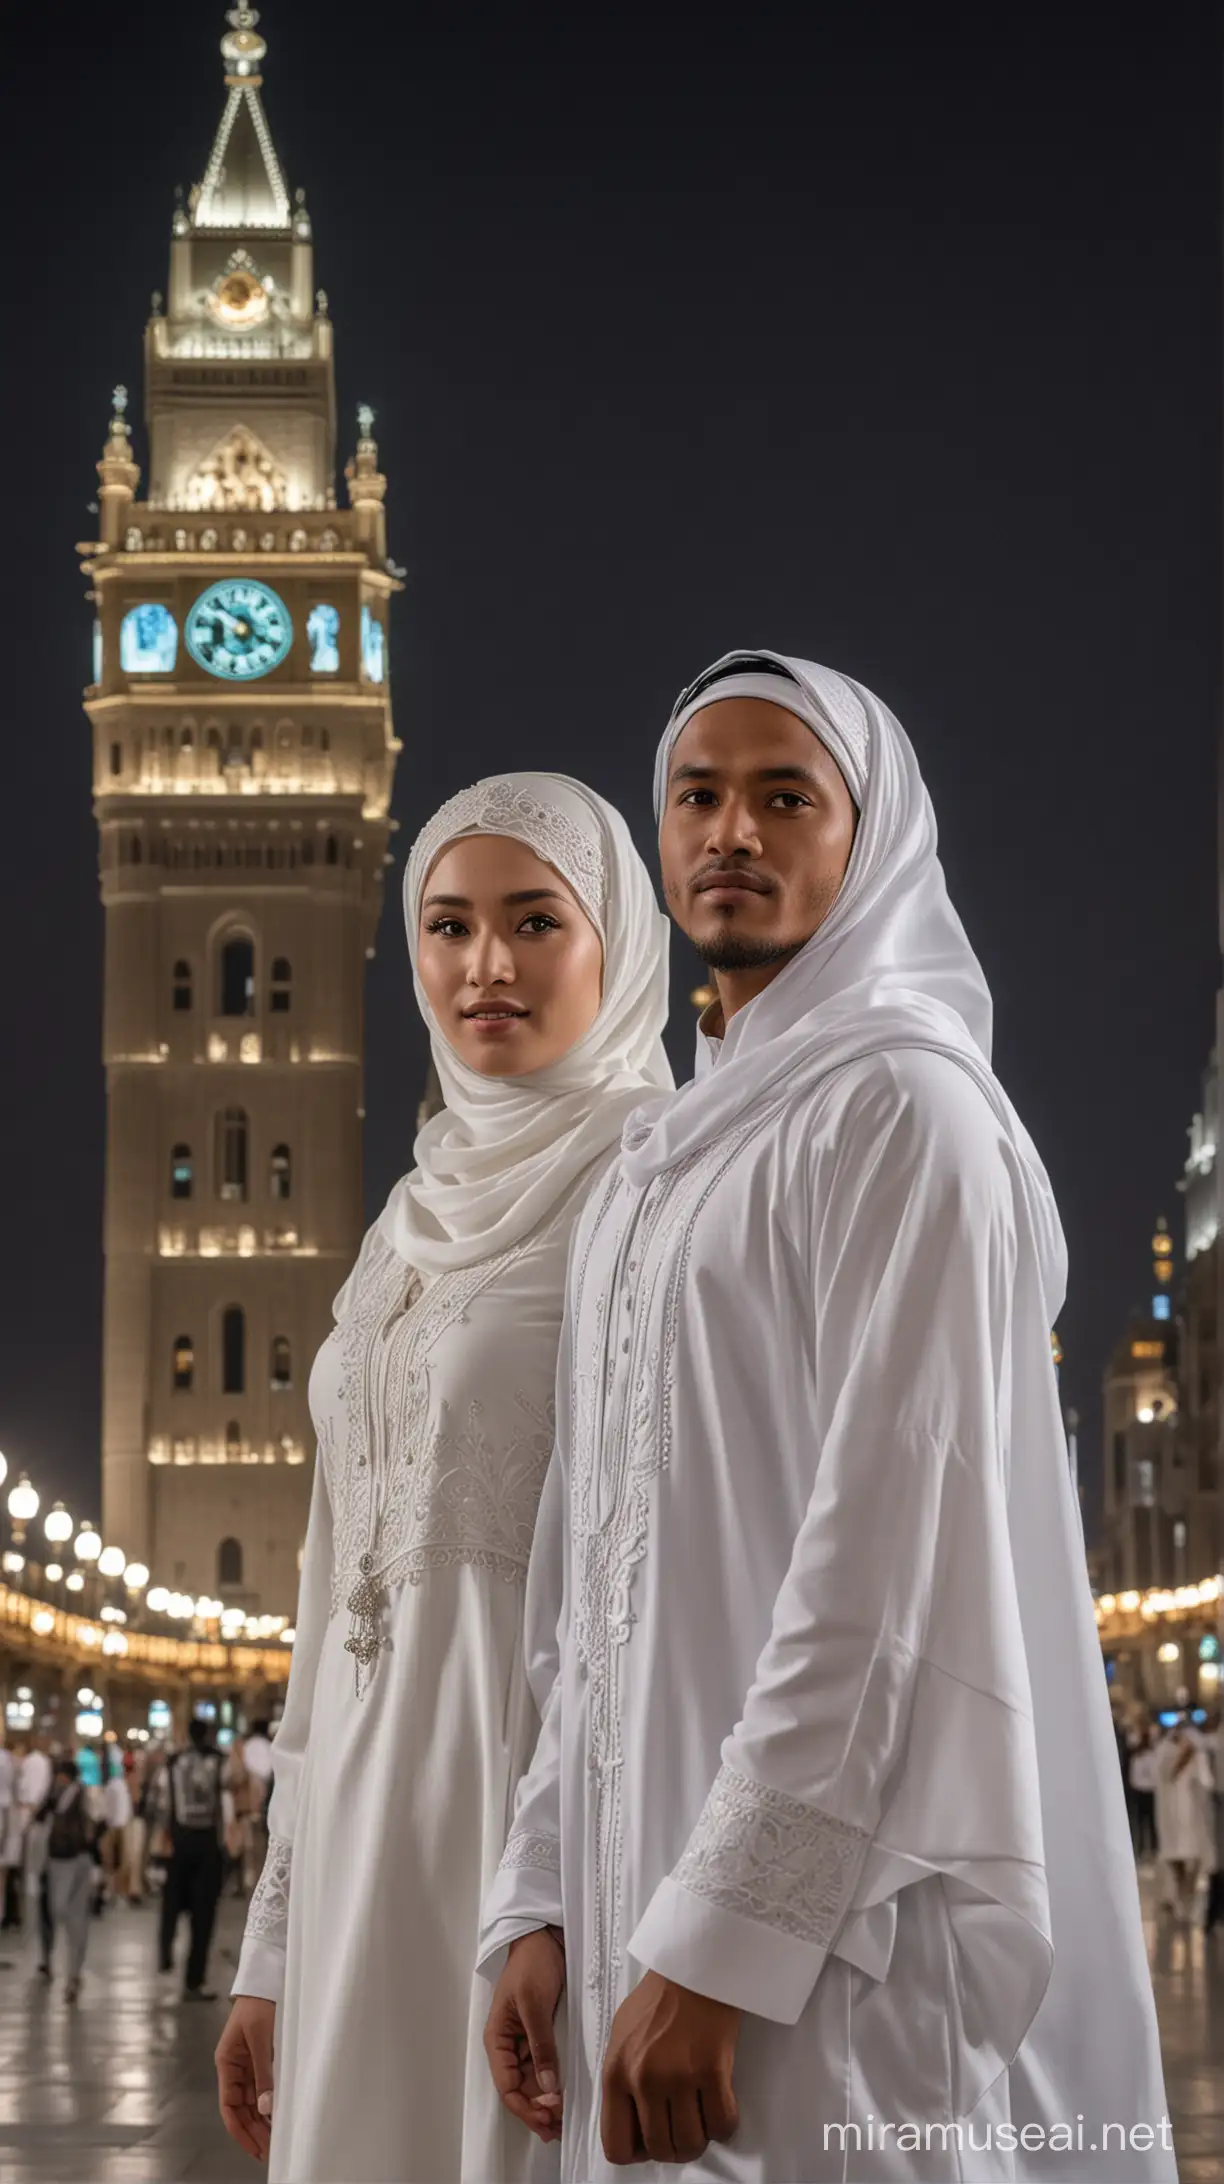 Indonesian Couple in Traditional Attire under Makkah Royal Clock Tower at Night